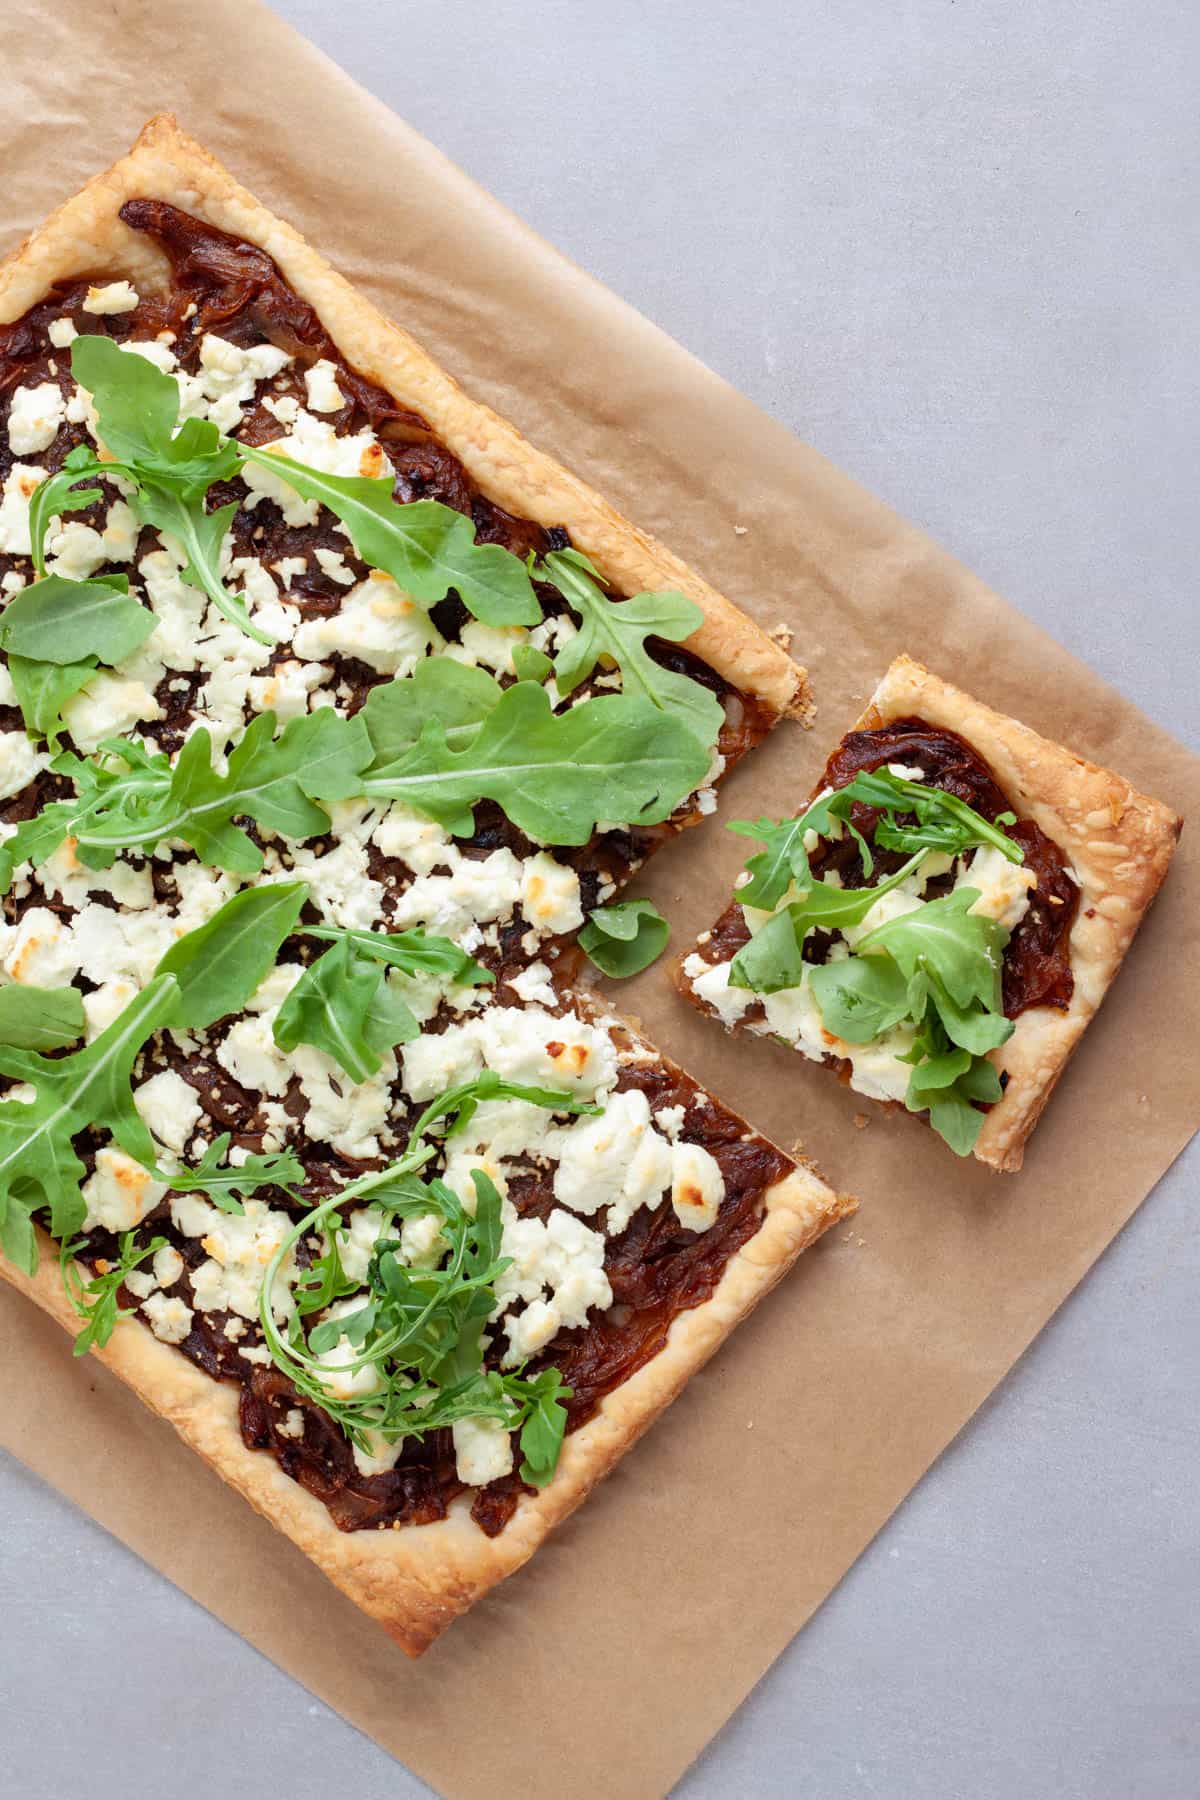 A caramelized onion and goat cheese tart on parchment paper with a portion cut out.